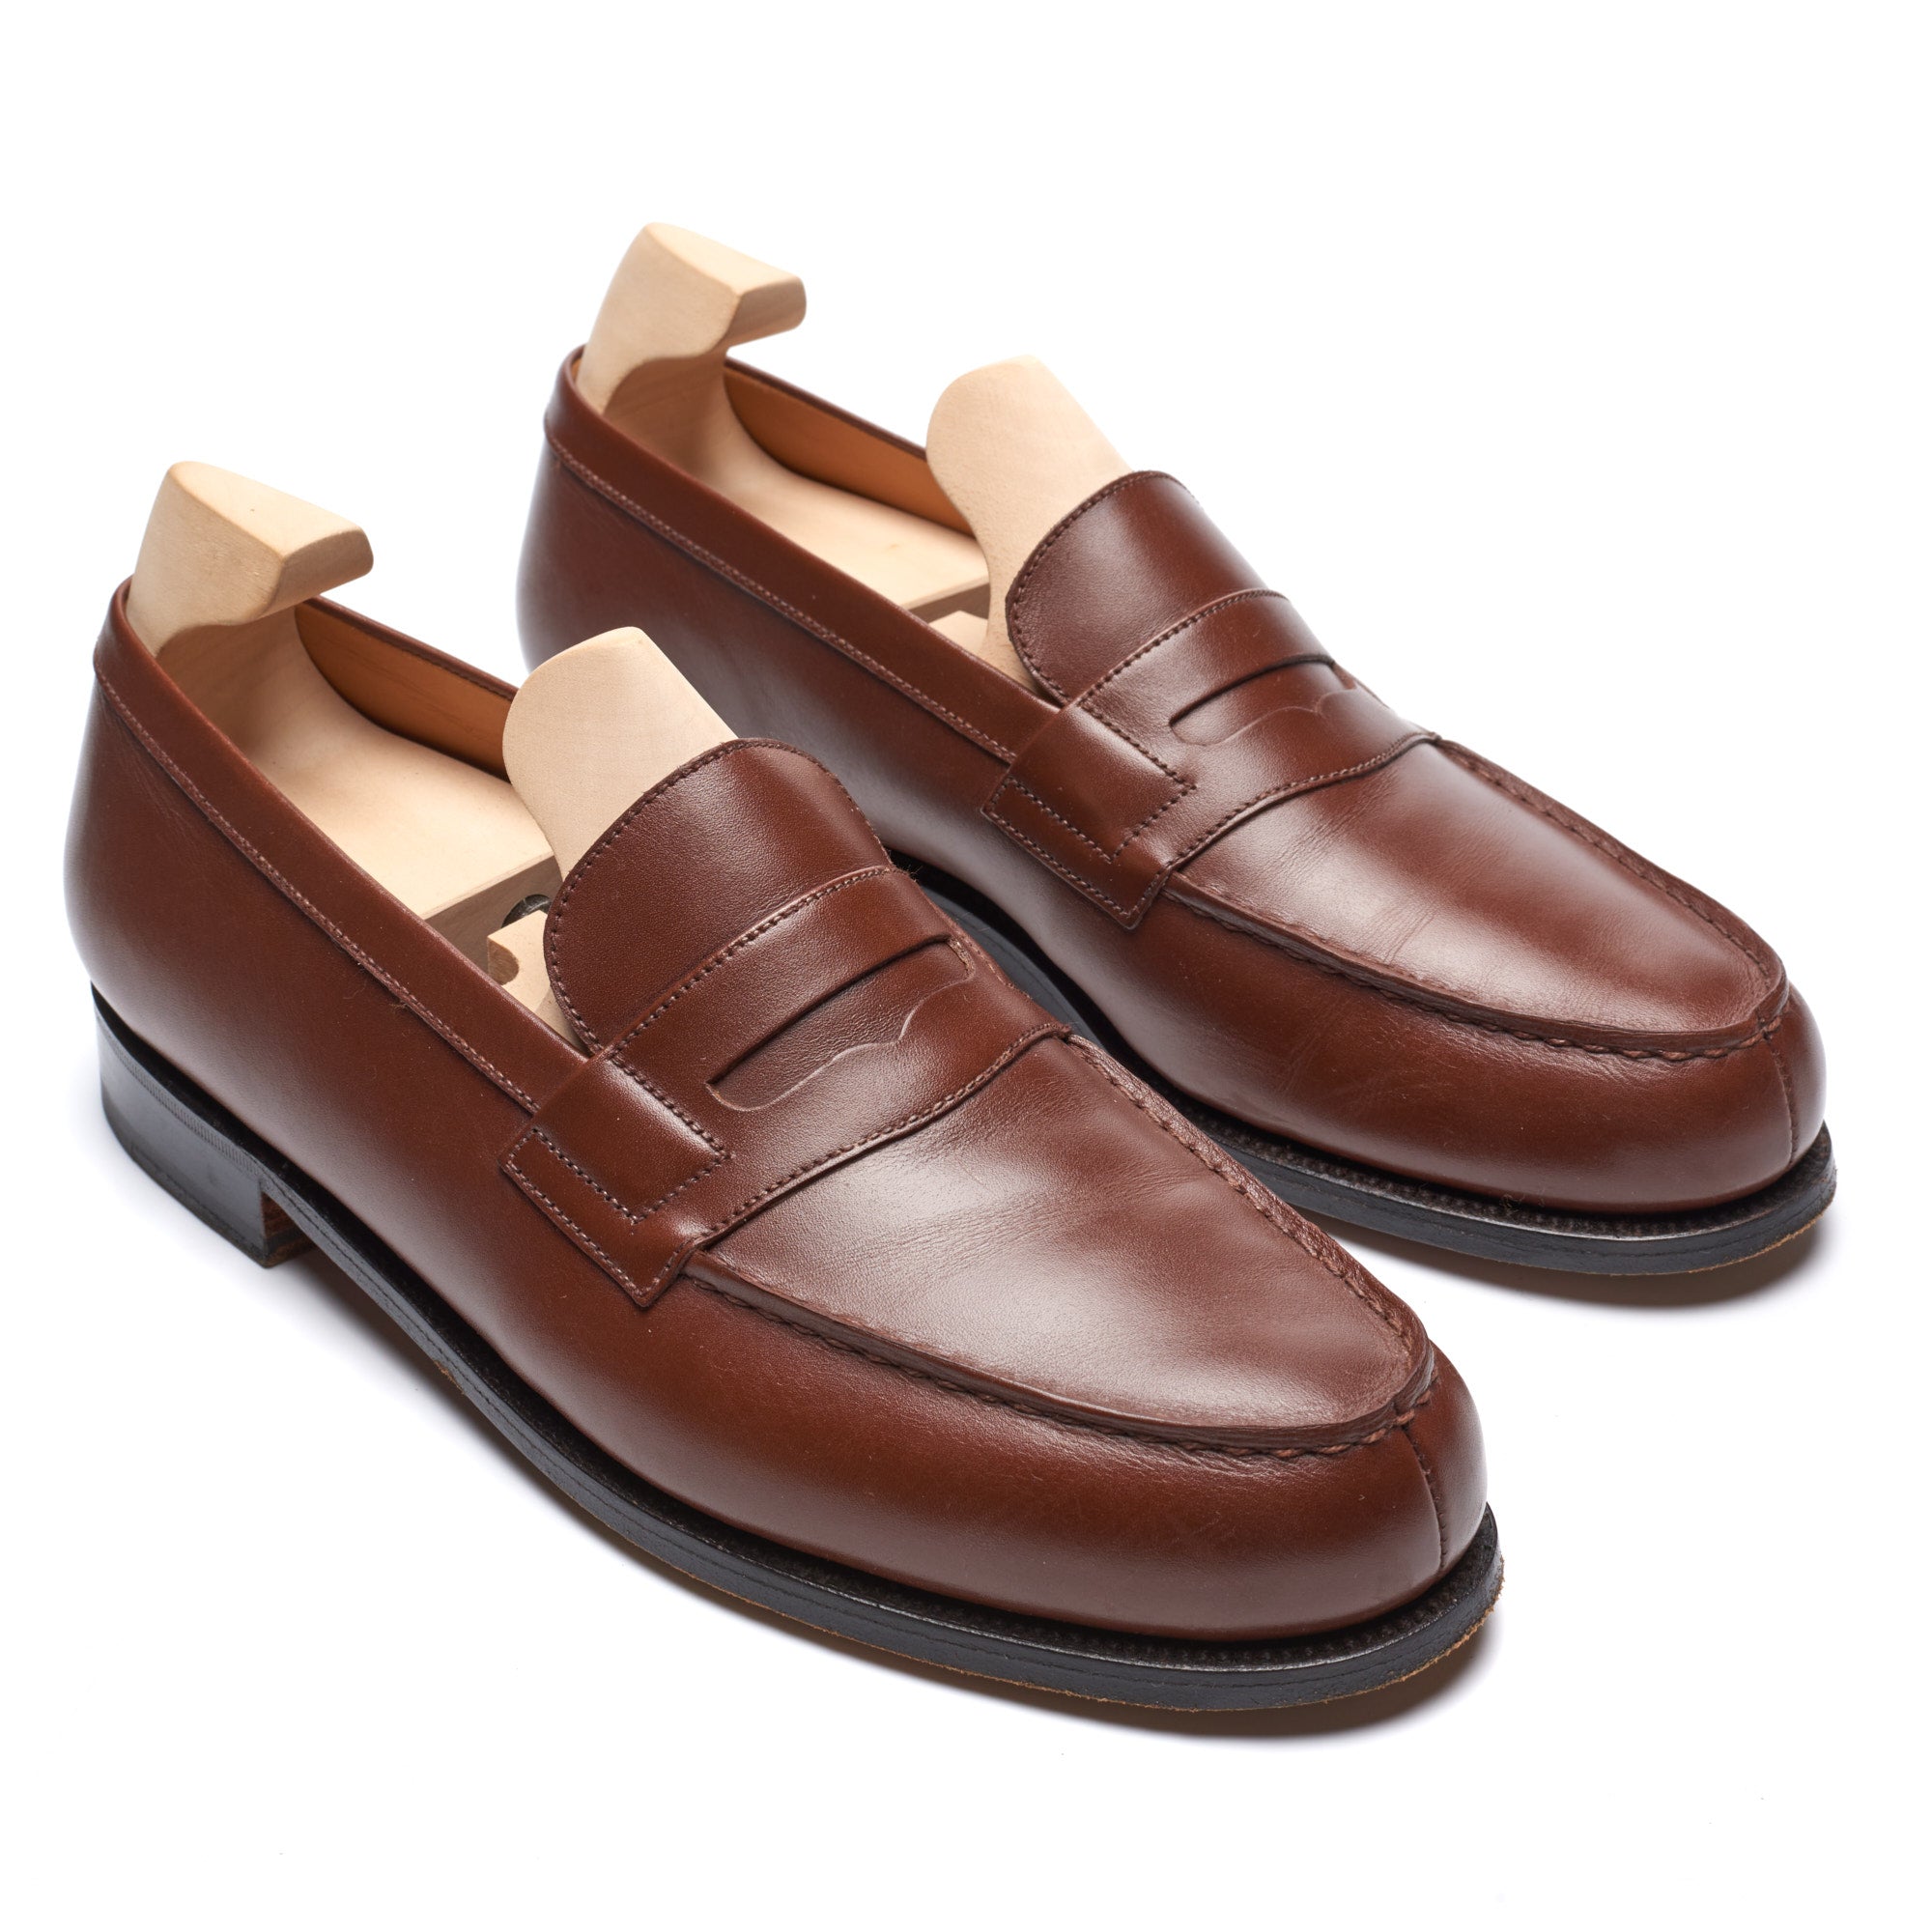 J.M. WESTON 180 Loafer Brown Box Calf Leather Moc Toe Penny Loafer Shoes 7.5C US 8.5 J.M. WESTON